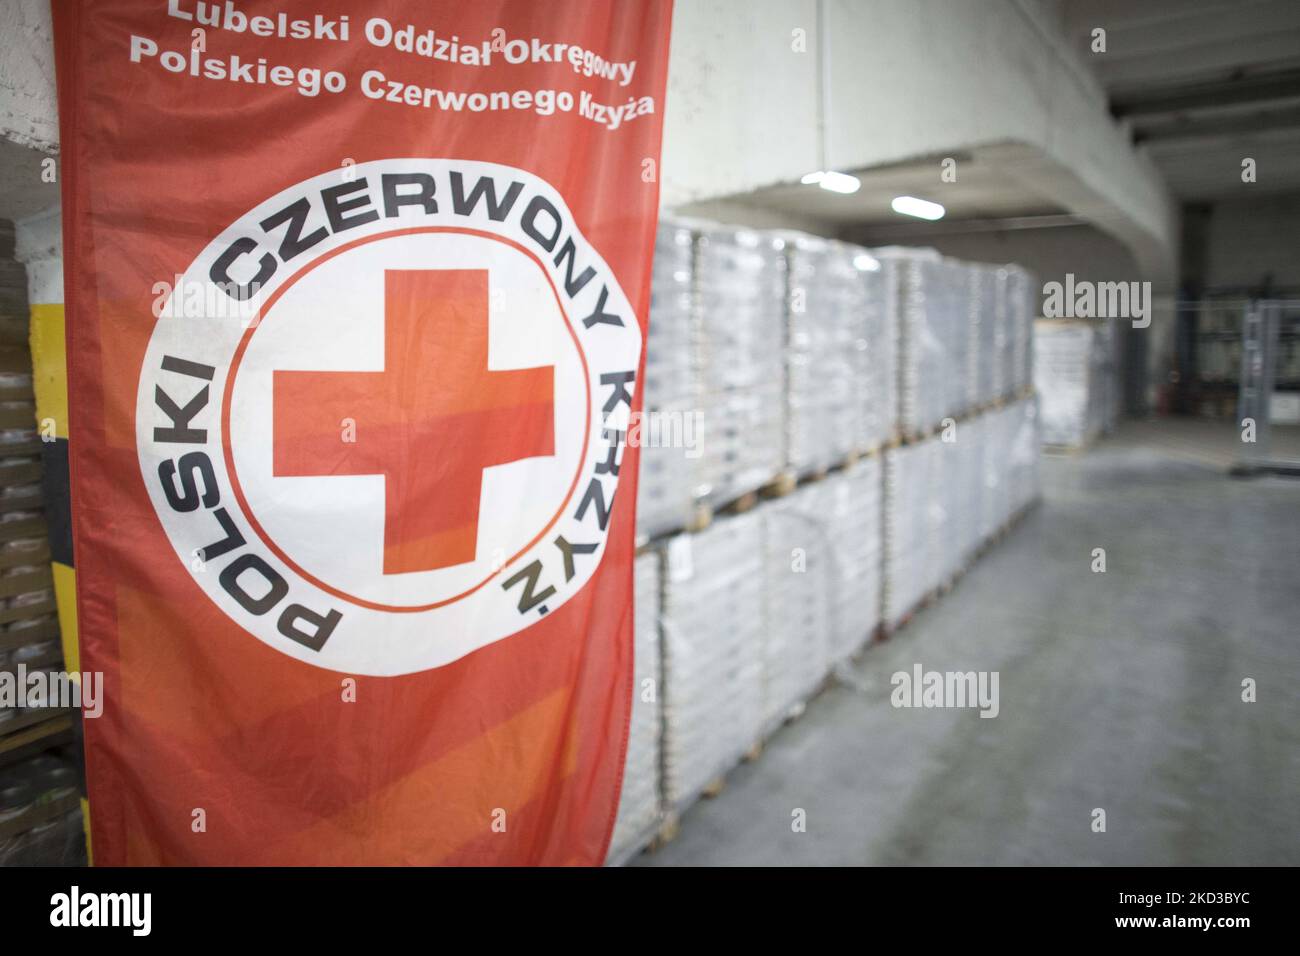 Red Cross warehouse with help for Ukrainian refugees seen in Lublin, Poland on February 23, 2022. (Photo by Maciej Luczniewski/NurPhoto) Stock Photo